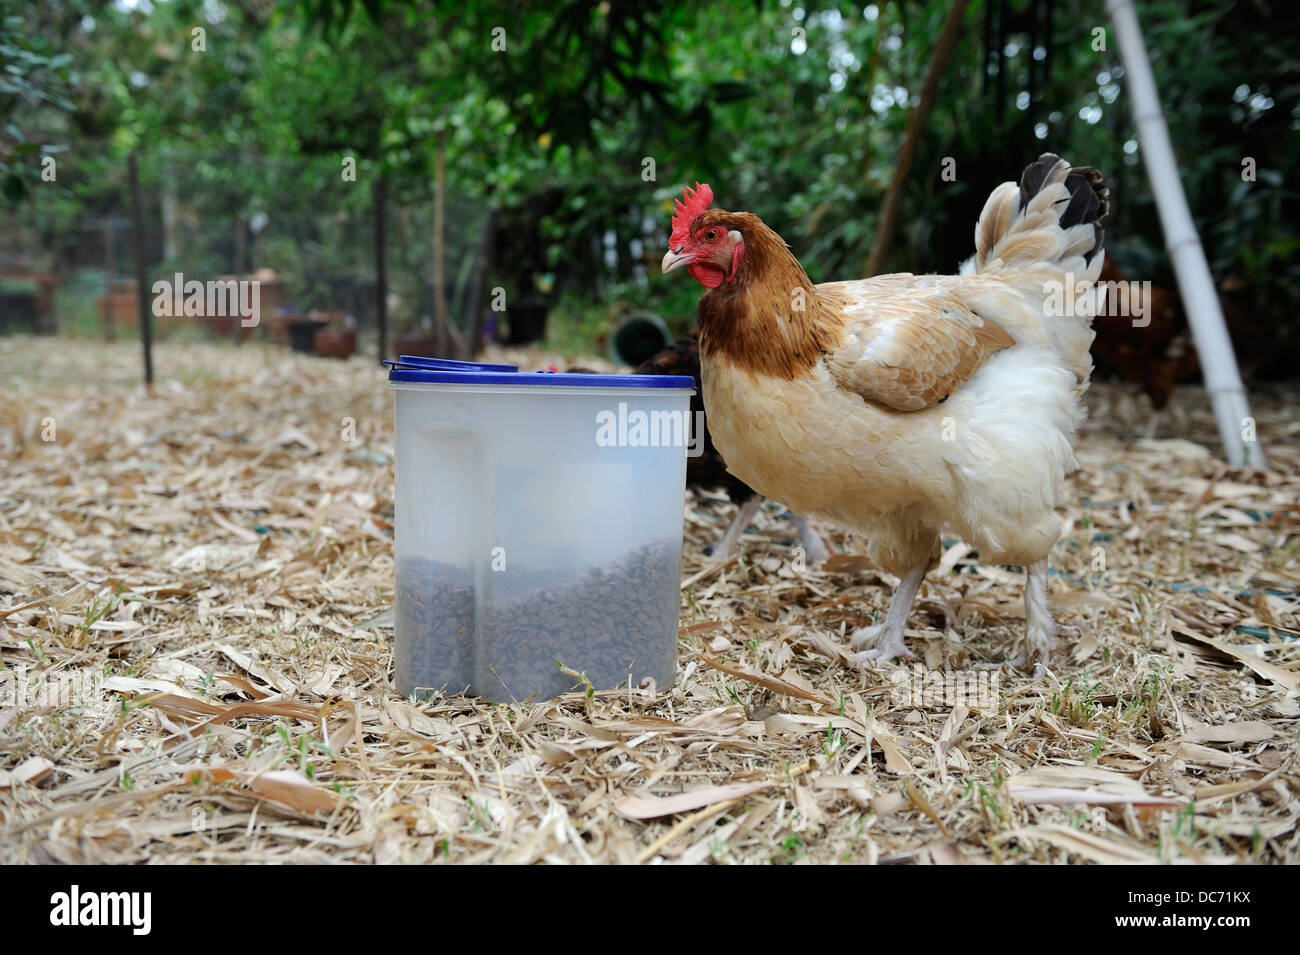 French Maran hen looking at container of cat food biscuits Stock Photo